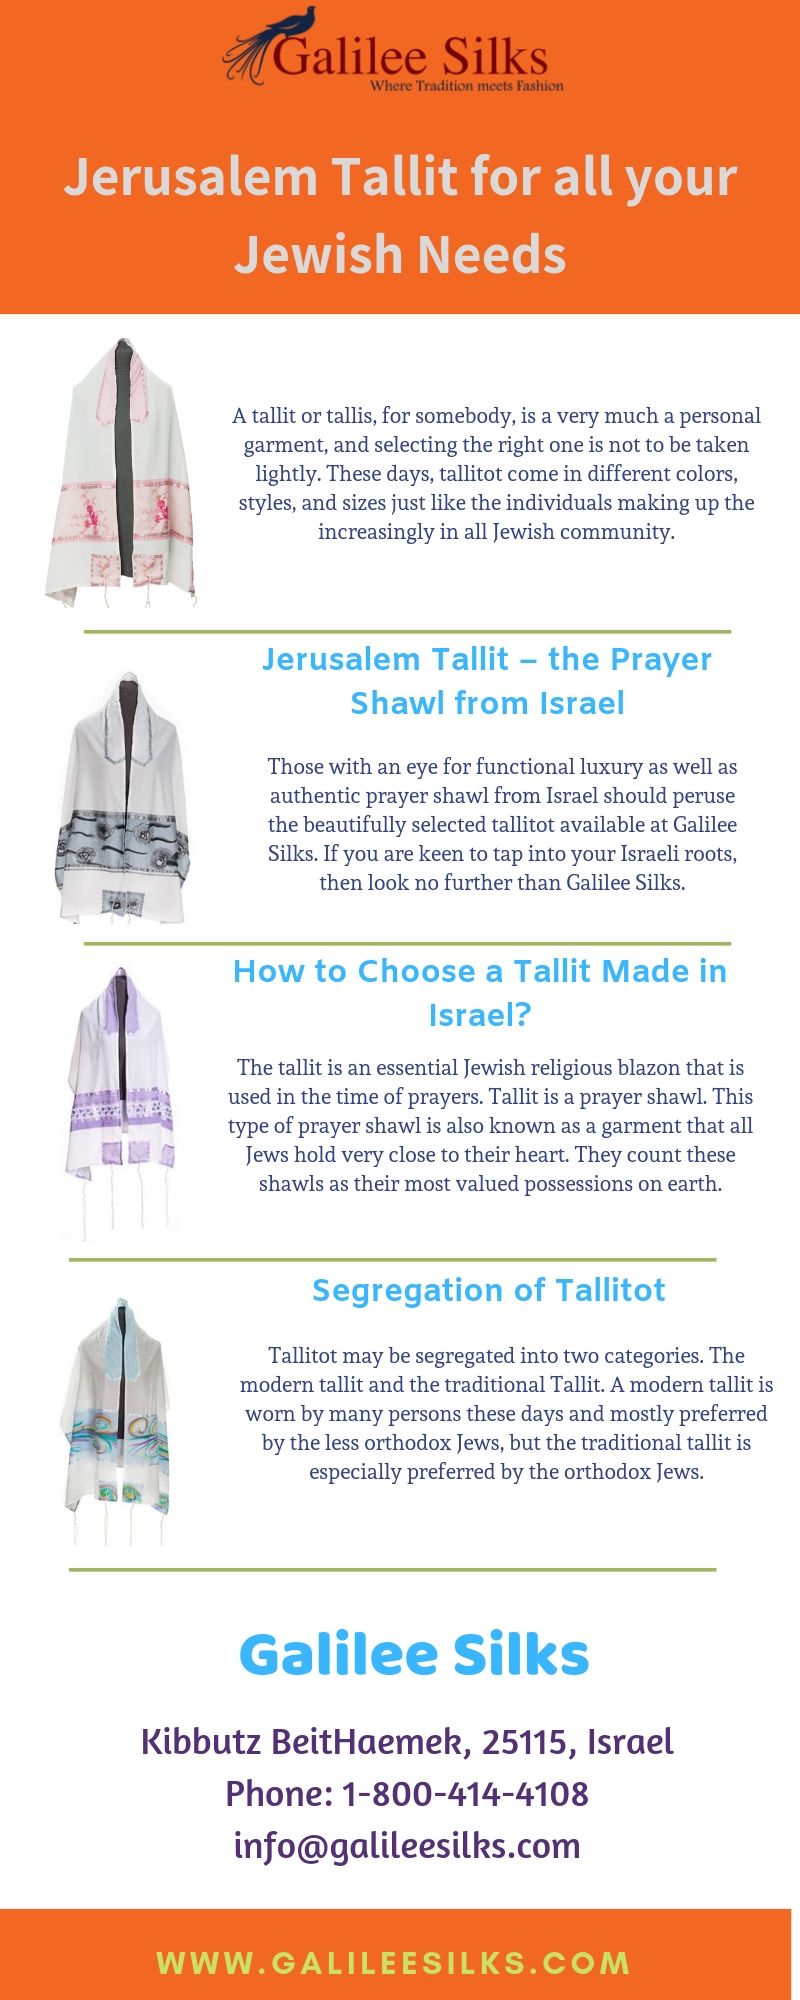 Jerusalem Tallit for all your Jewish Needs The modern, classic and traditional Jerusalem tallit or Israeli tallitot are made of wool, silk, and other materials, in different colors, sizes, and styles. For more details, visit this link: https://bit.ly/2EHILP4
 by amramrafi